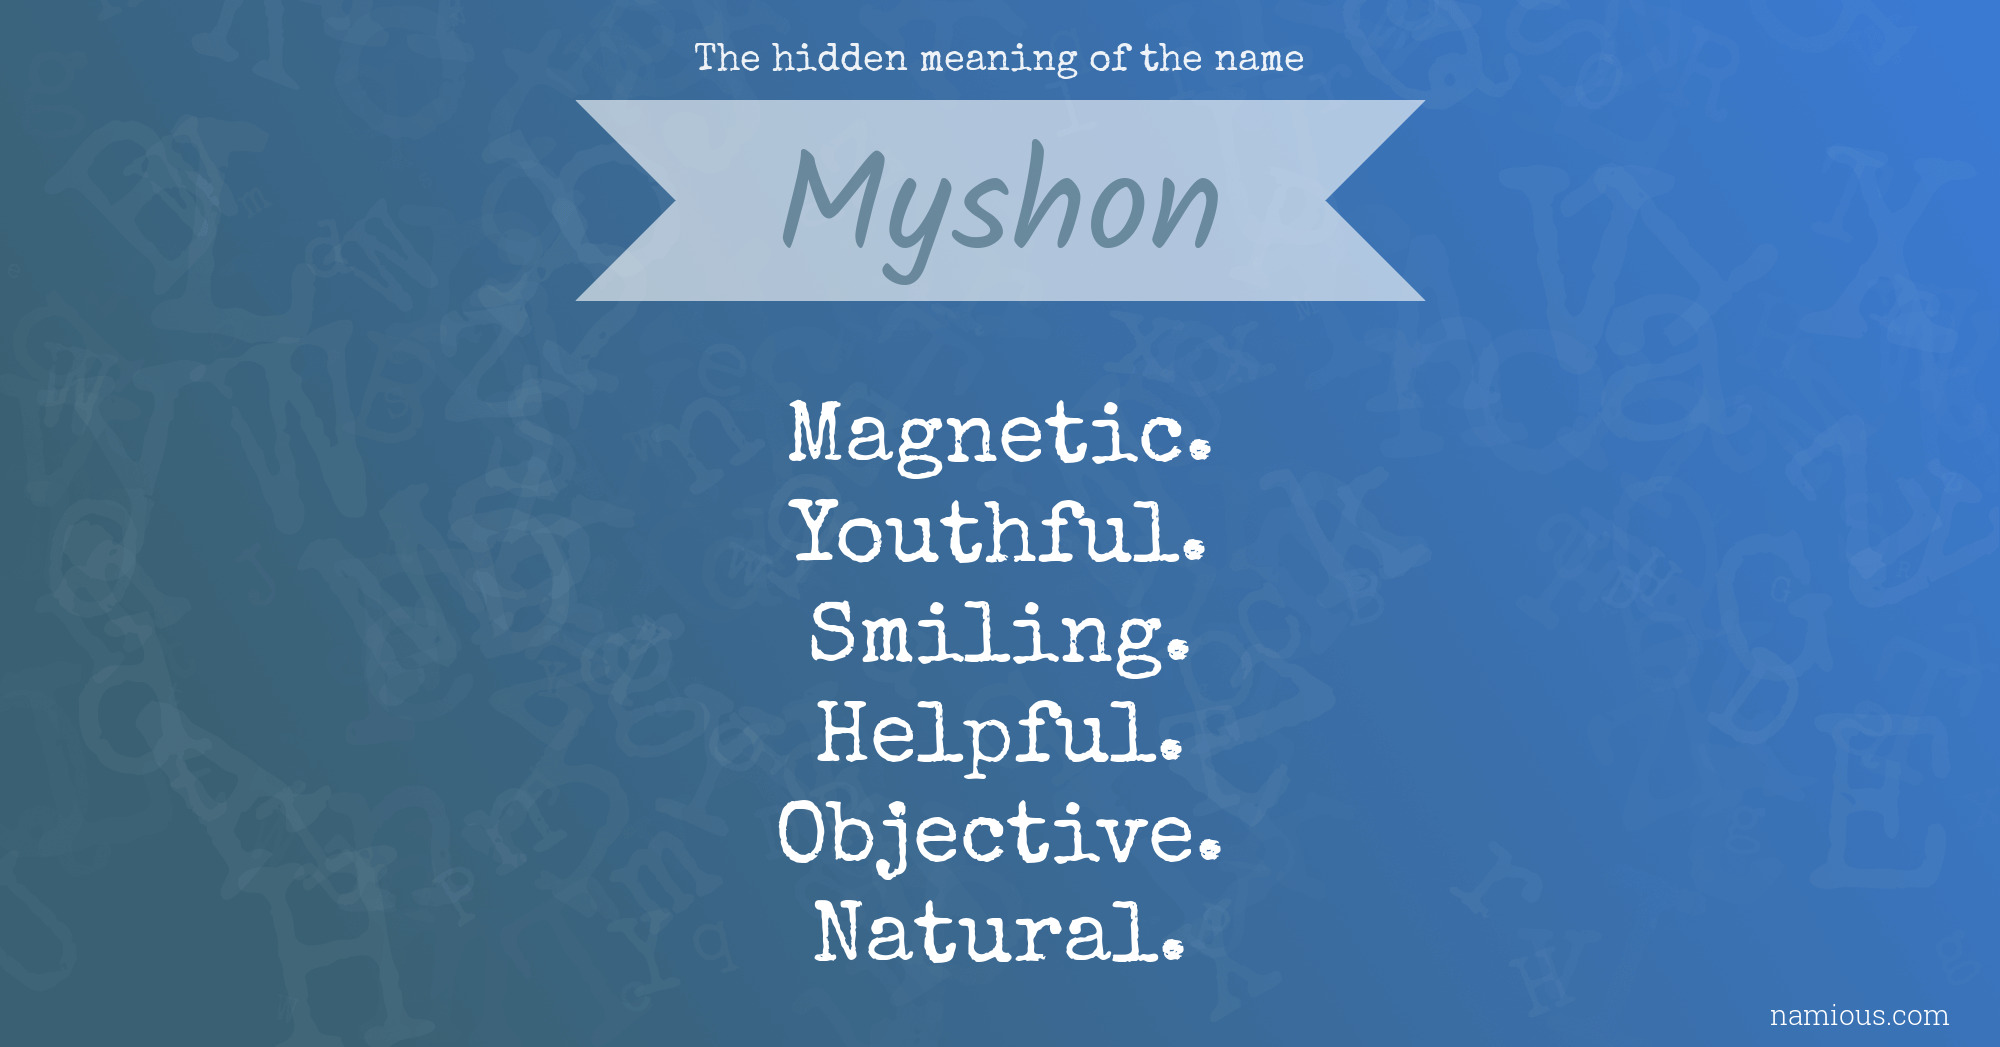 The hidden meaning of the name Myshon